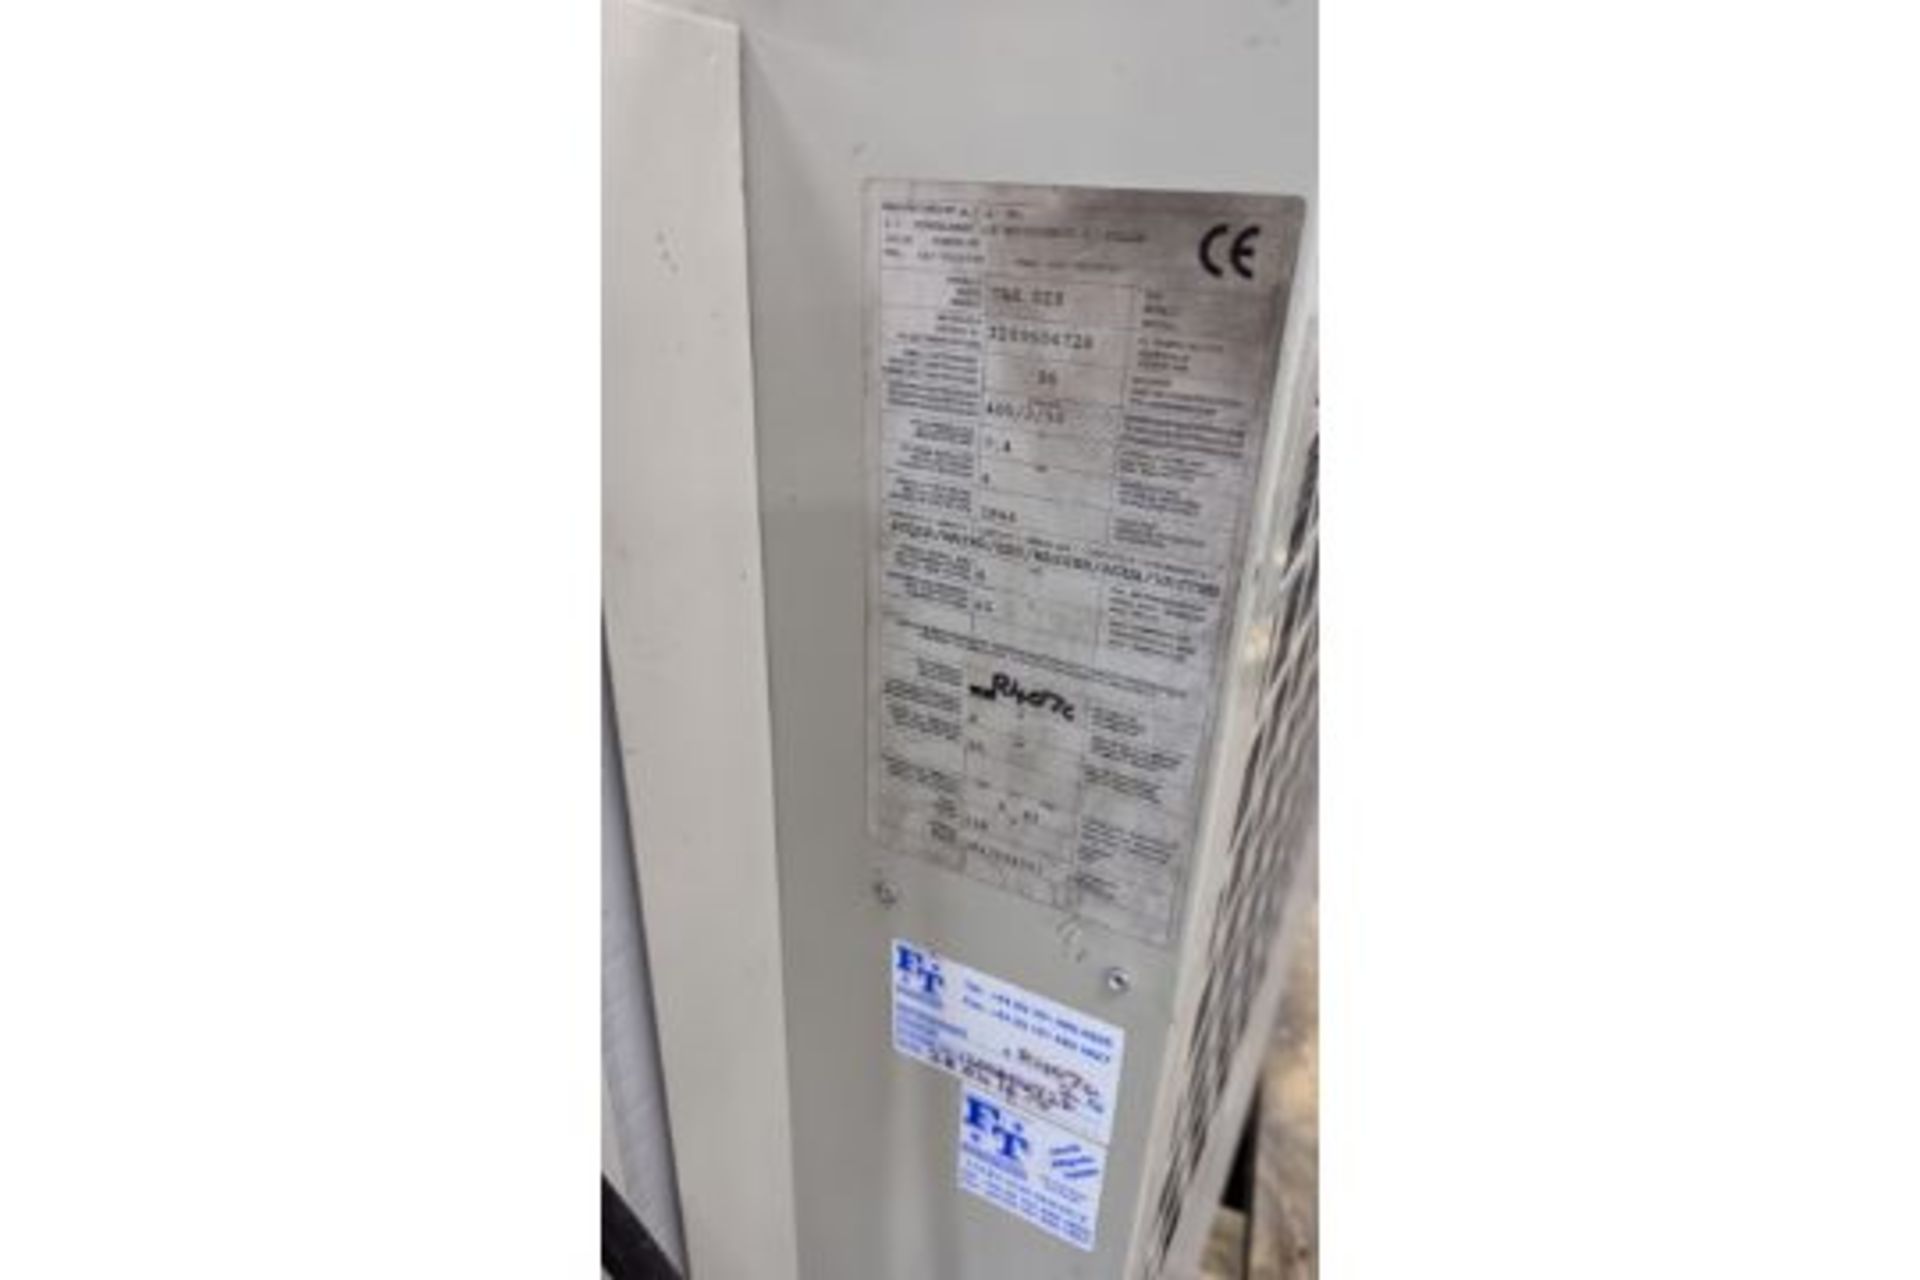 ICS type chiller TAE020 - Direct from commercial facility - Image 6 of 6